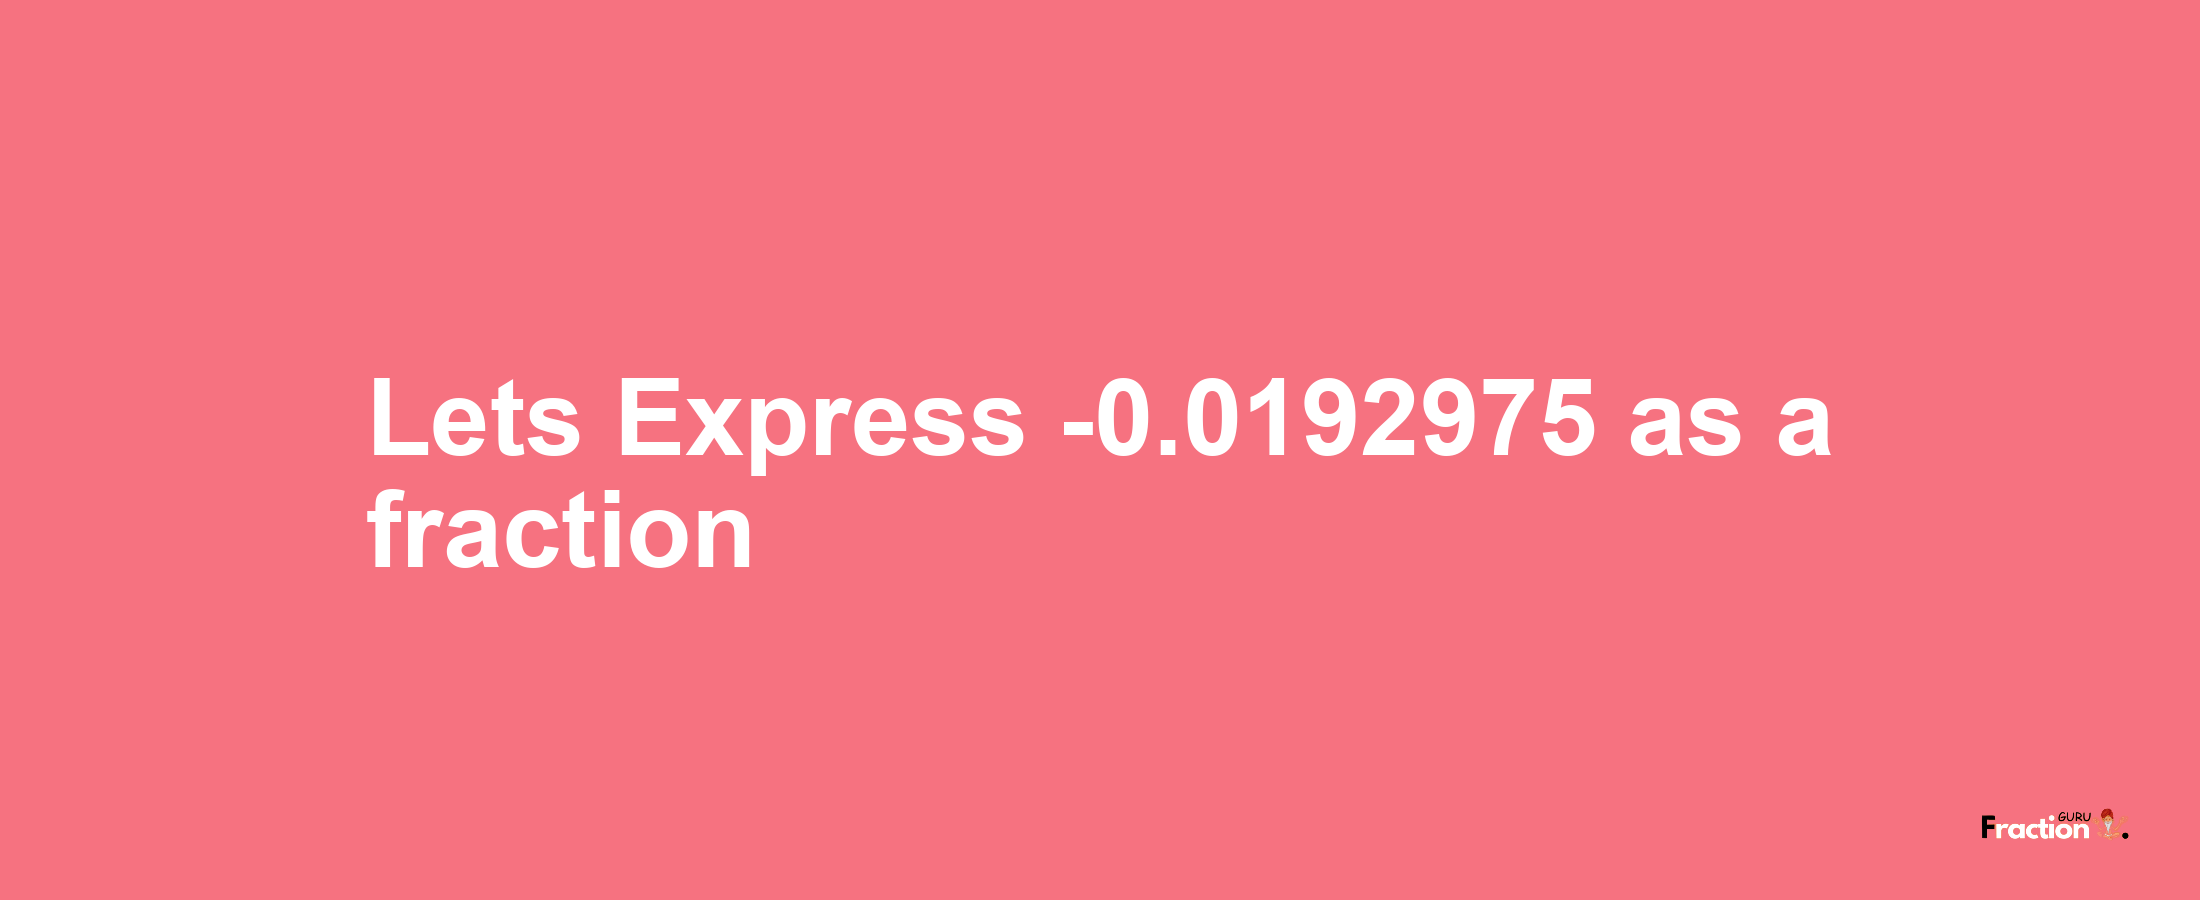 Lets Express -0.0192975 as afraction